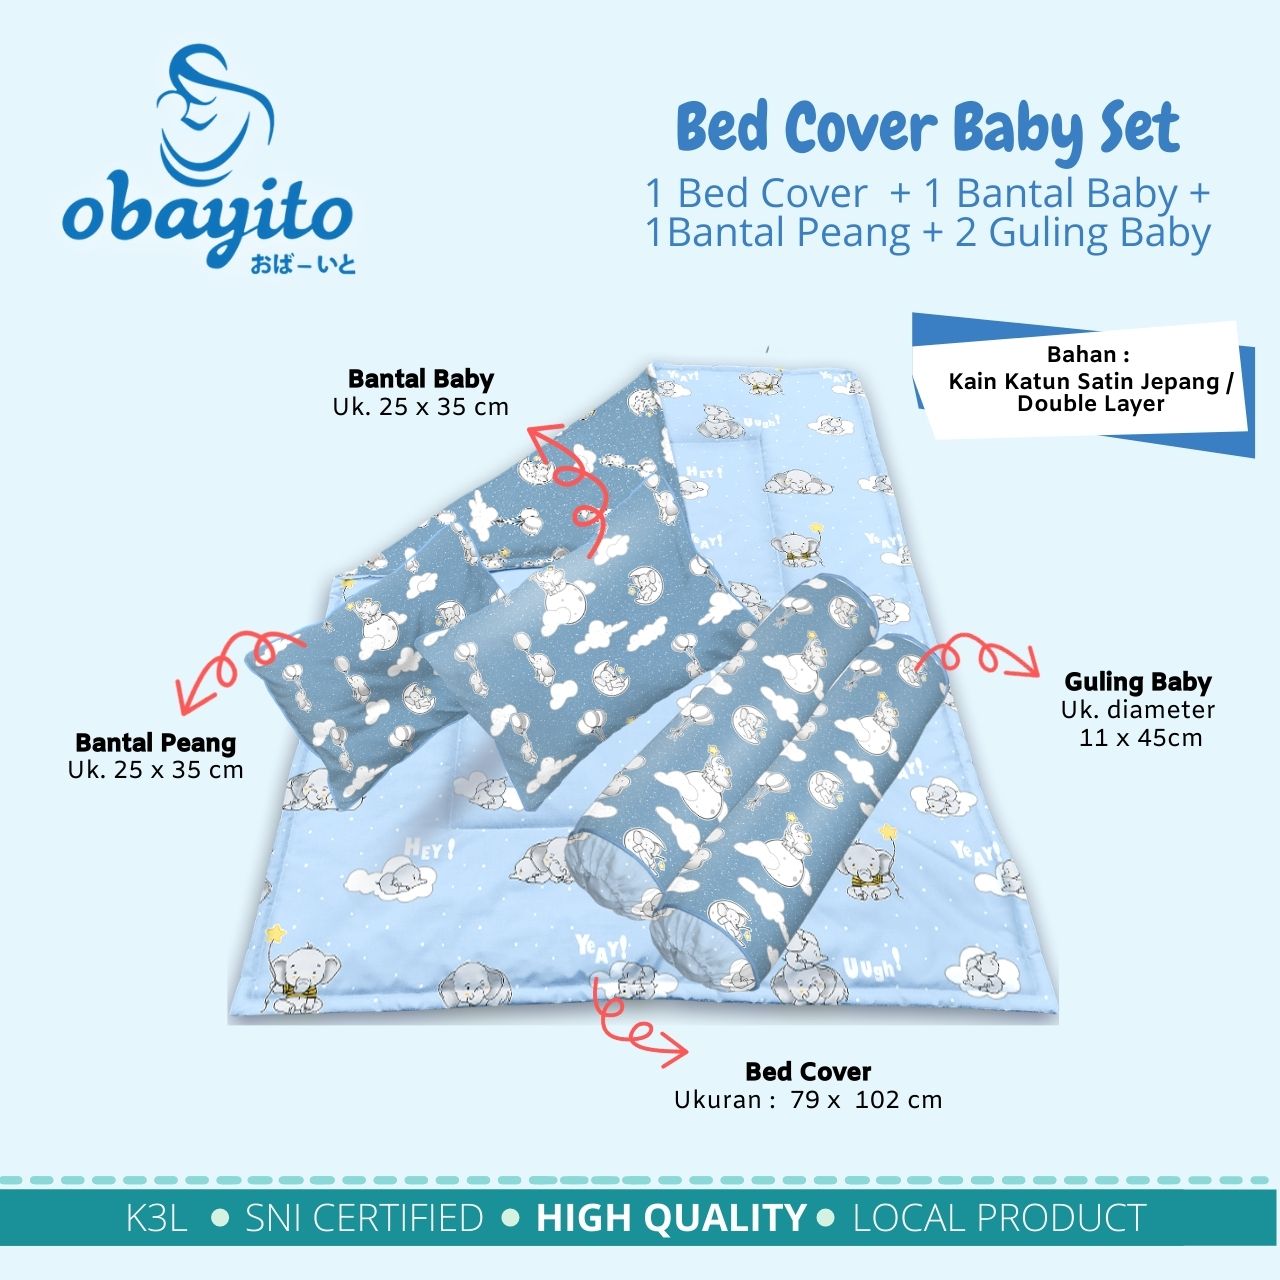 Bed Cover Baby set